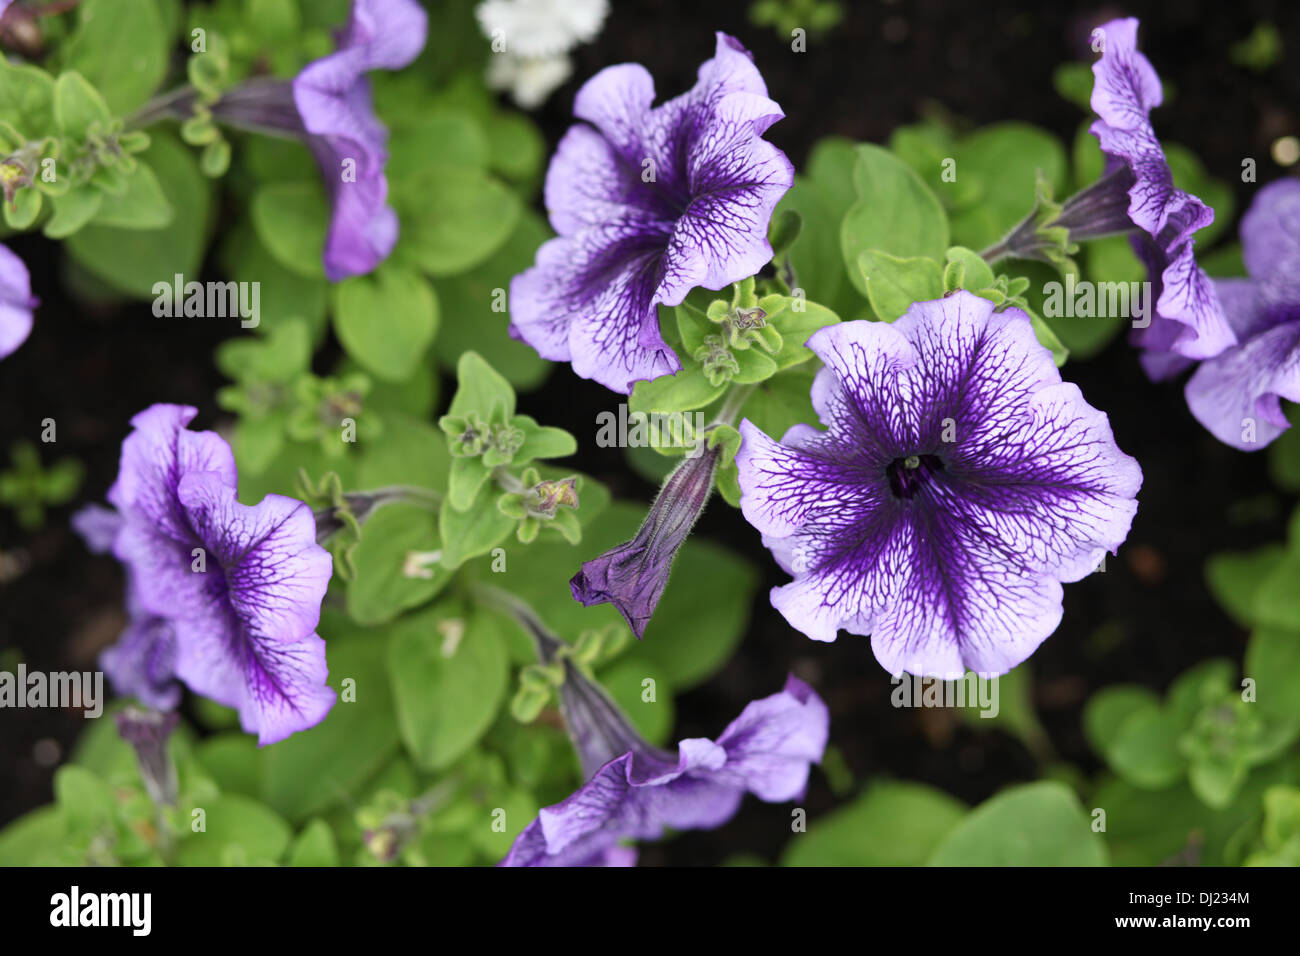 Perennial Petunia Purple and White in Colour With Green Foliage Stock Photo